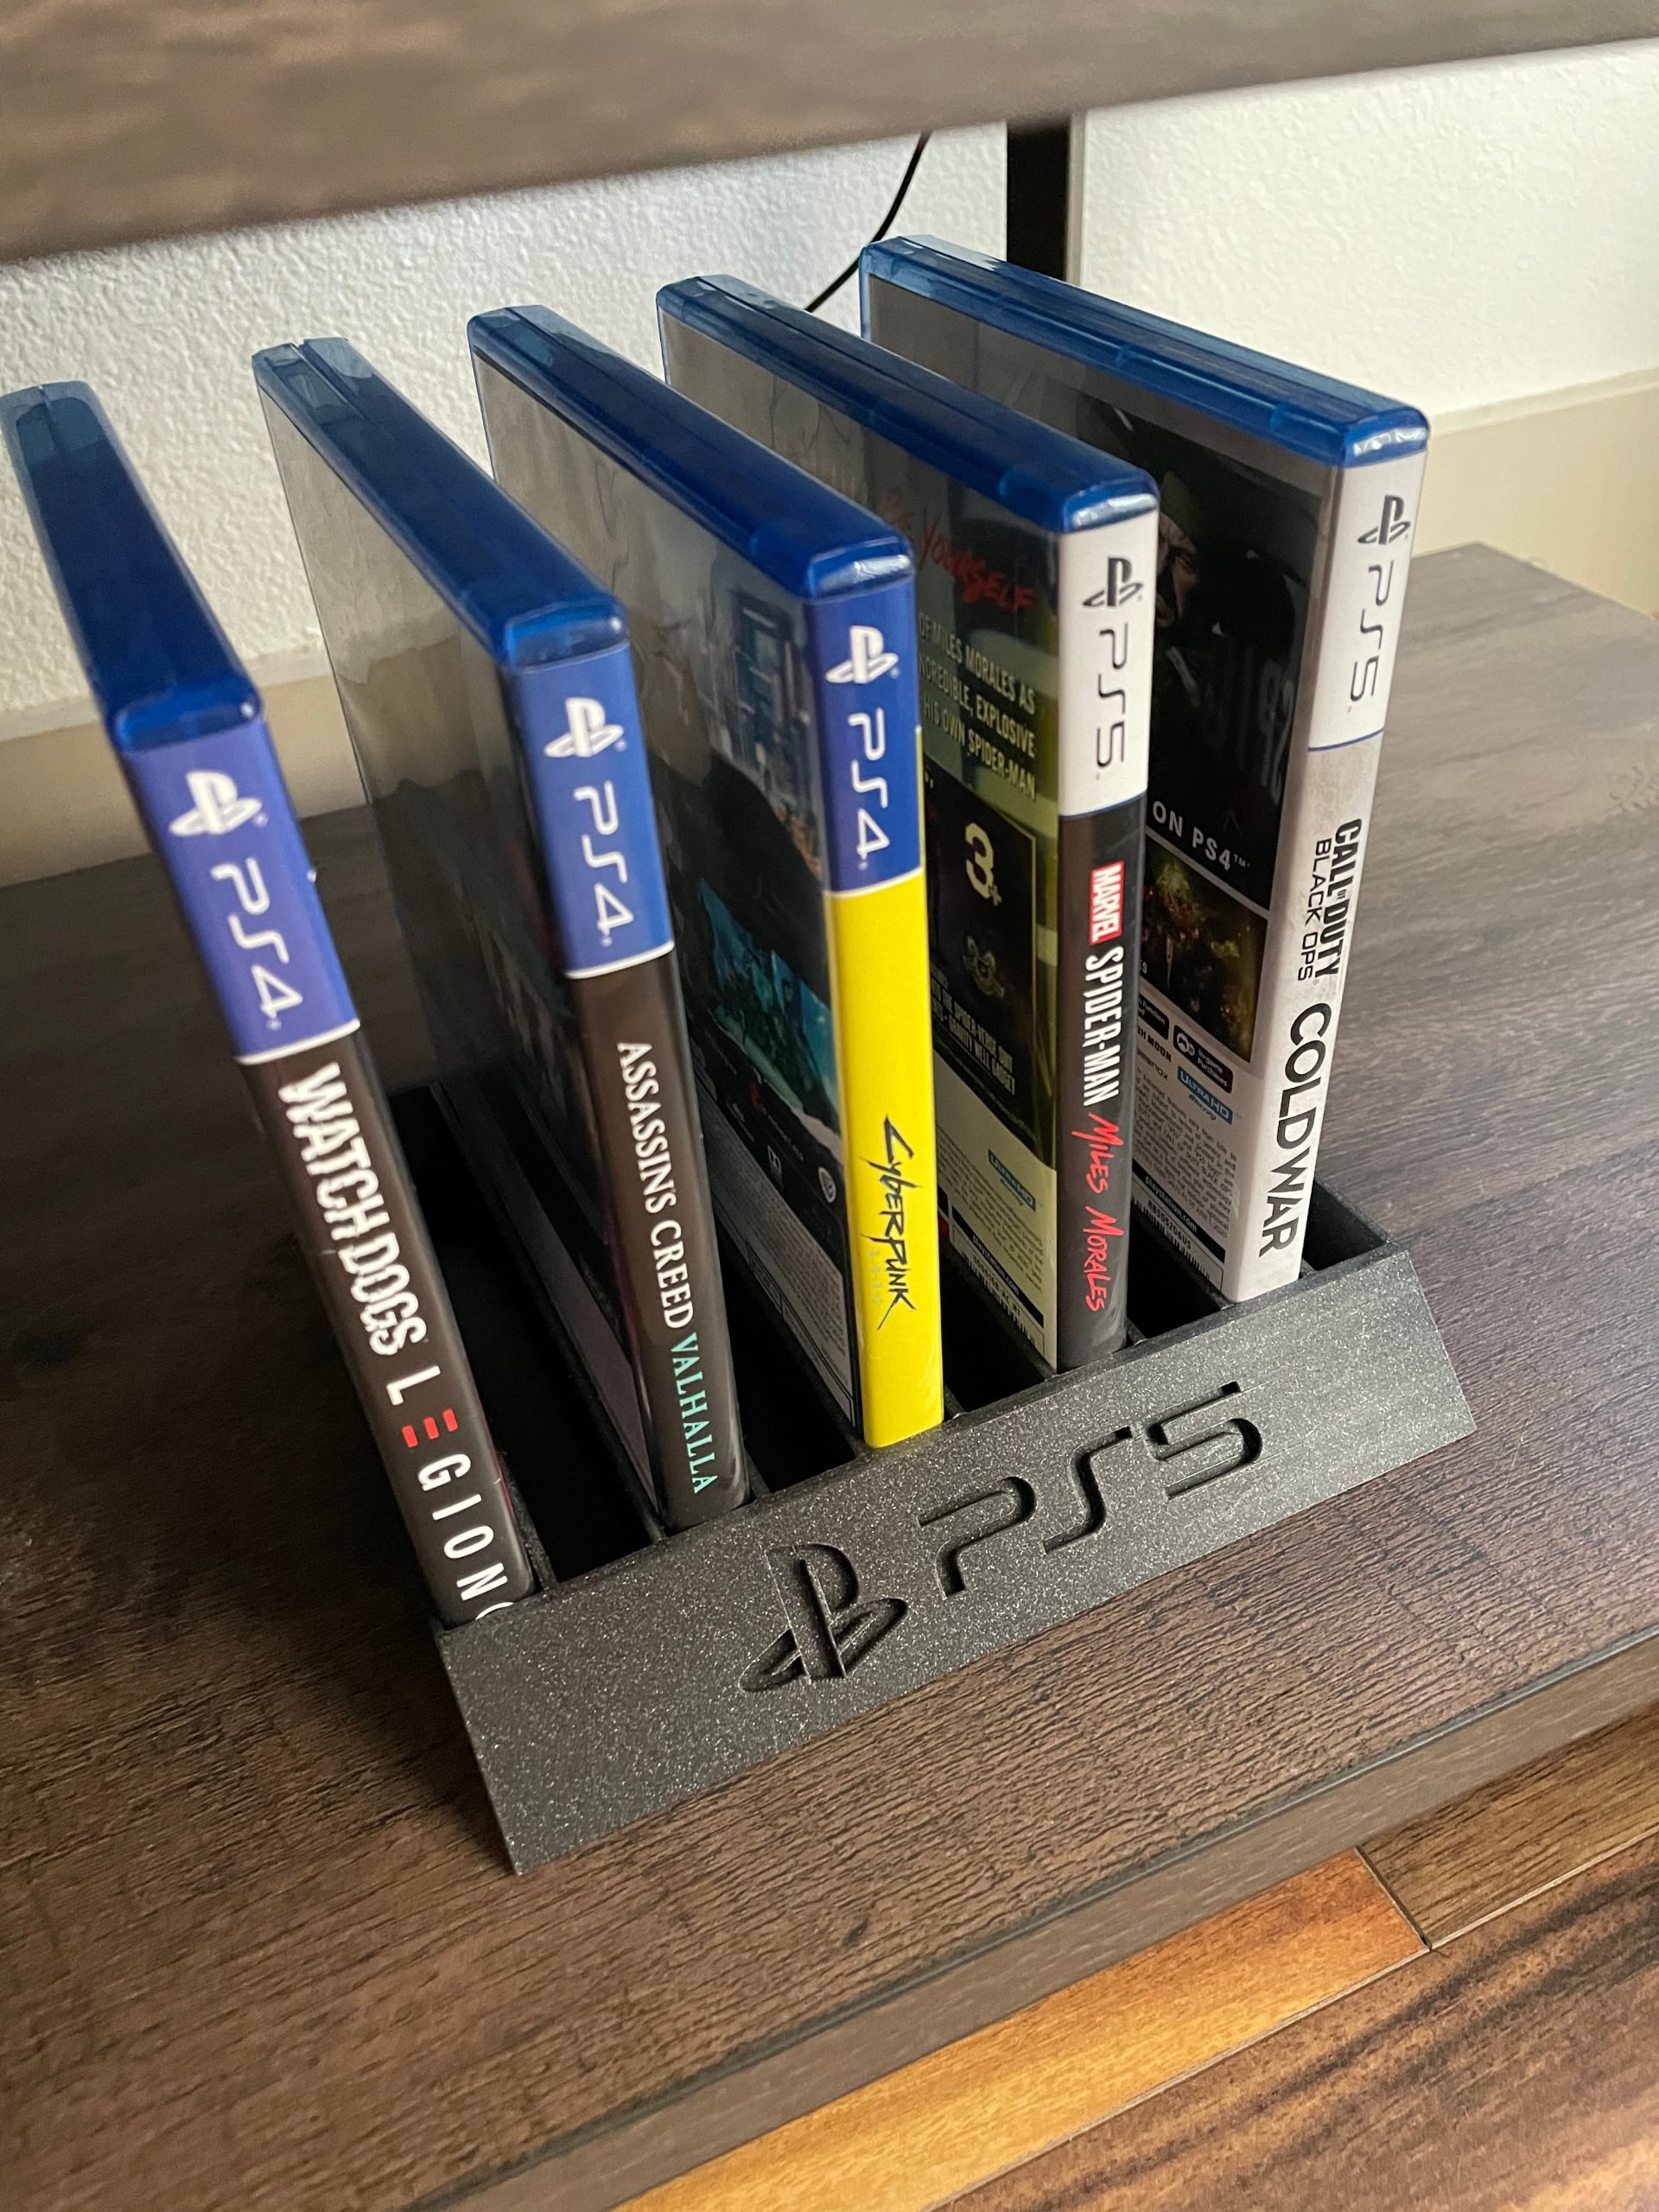 Sony PlayStation 5 Sleek Game Holder with PS5 Logo Trophy Case Jewel Case Stand – Holds 10